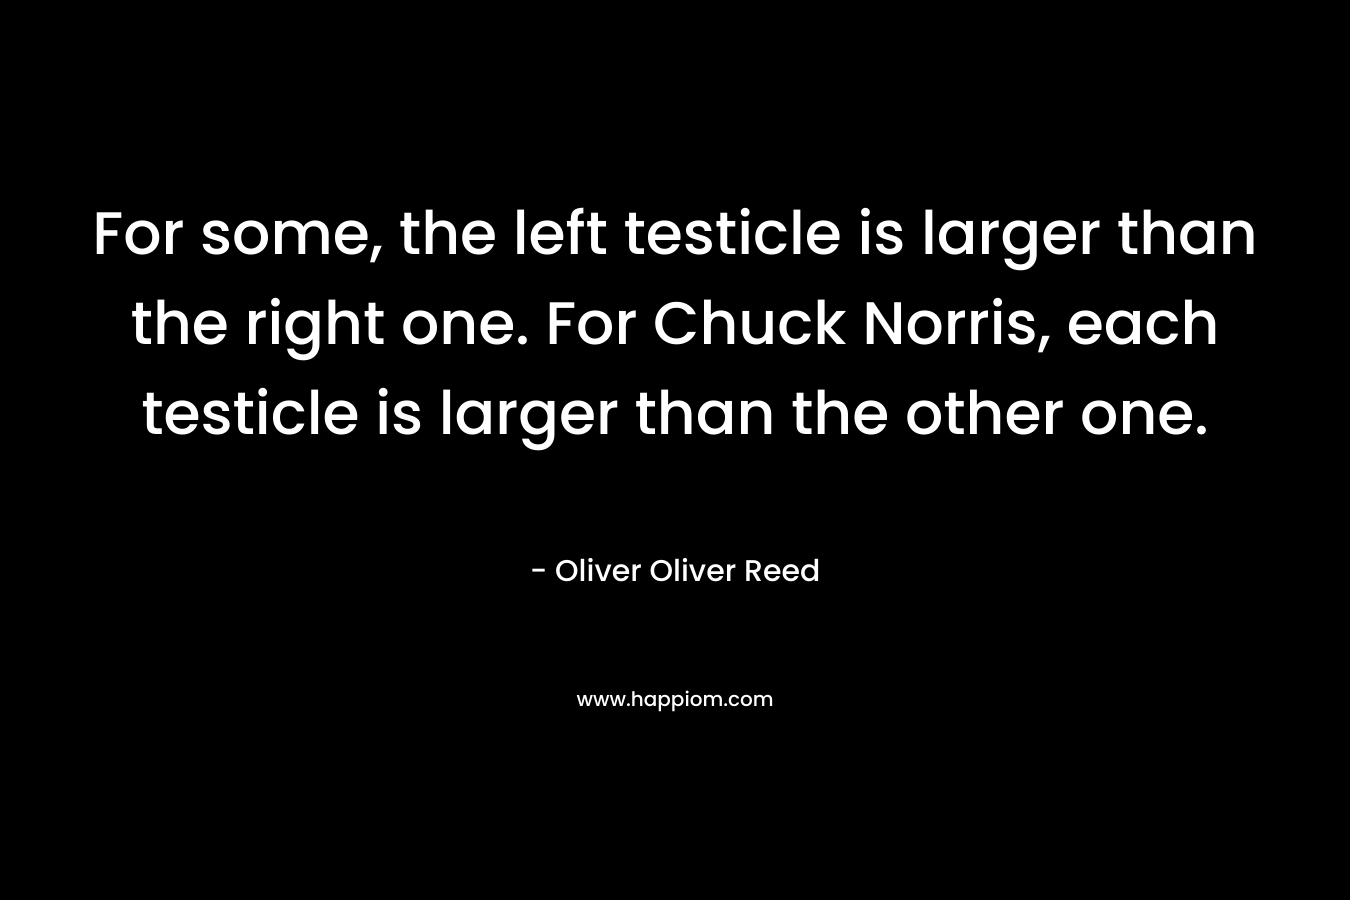 For some, the left testicle is larger than the right one. For Chuck Norris, each testicle is larger than the other one.